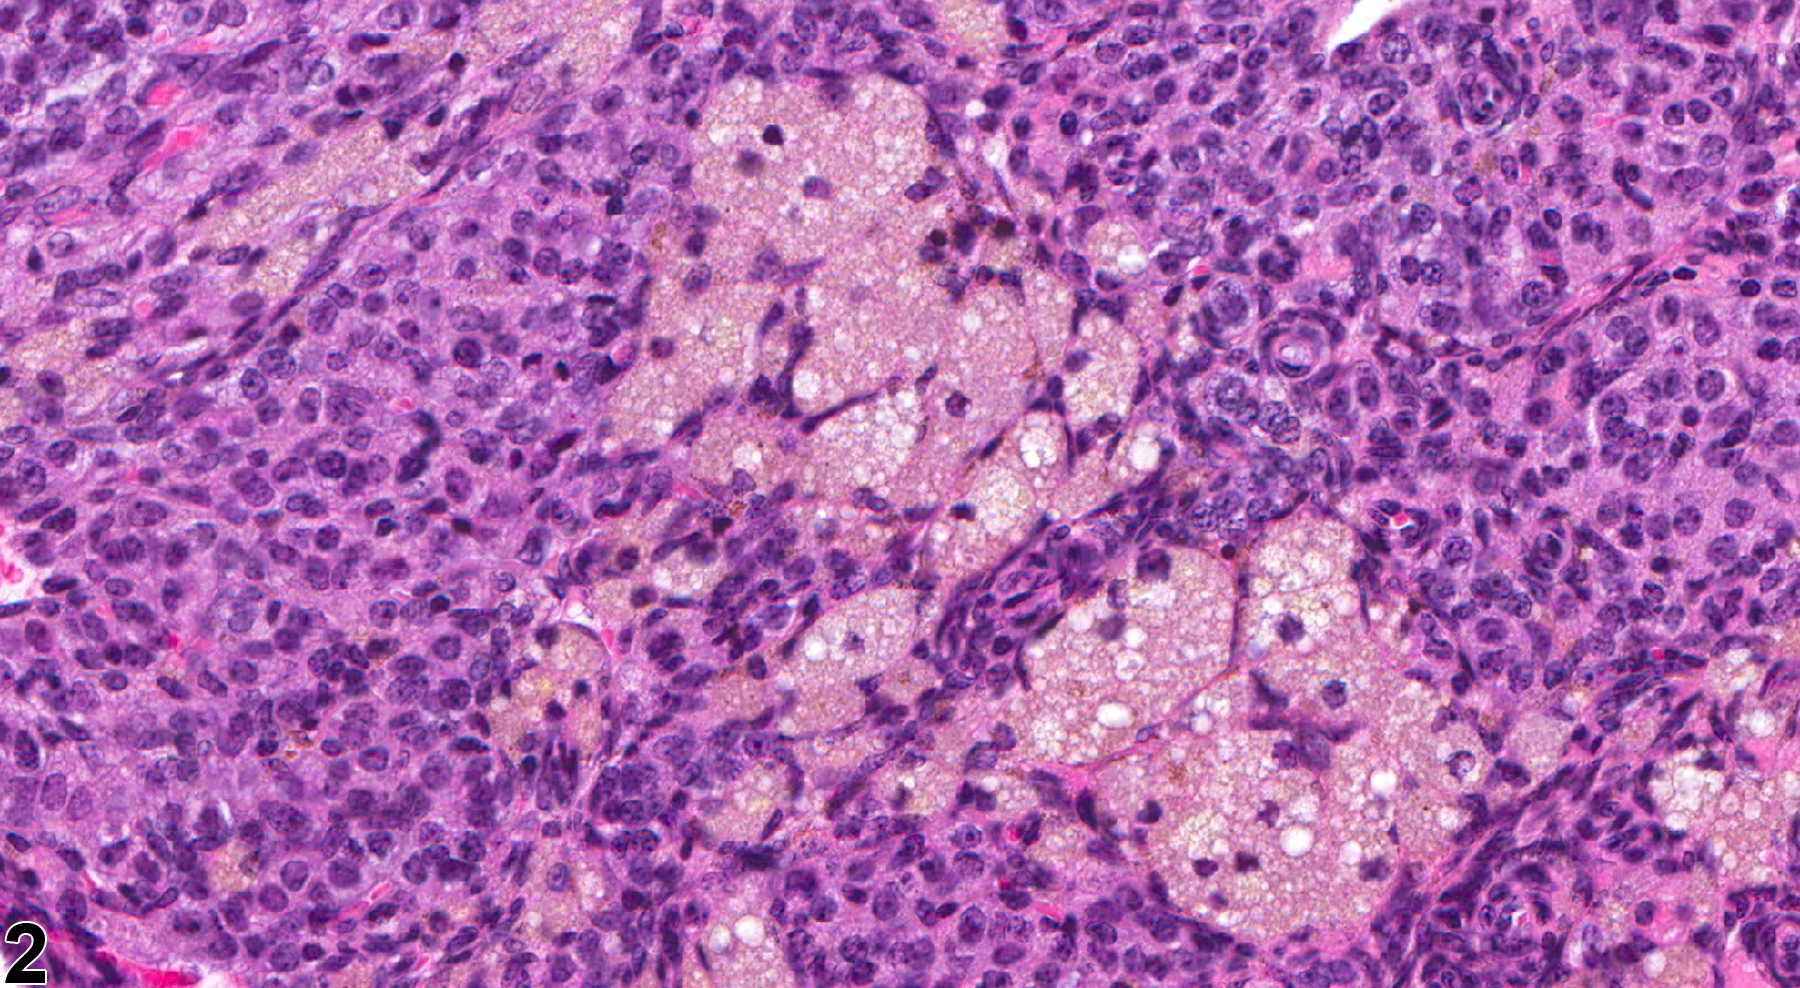 Image of pigment in the ovary from a female B6C3F1 mouse in a chronic study